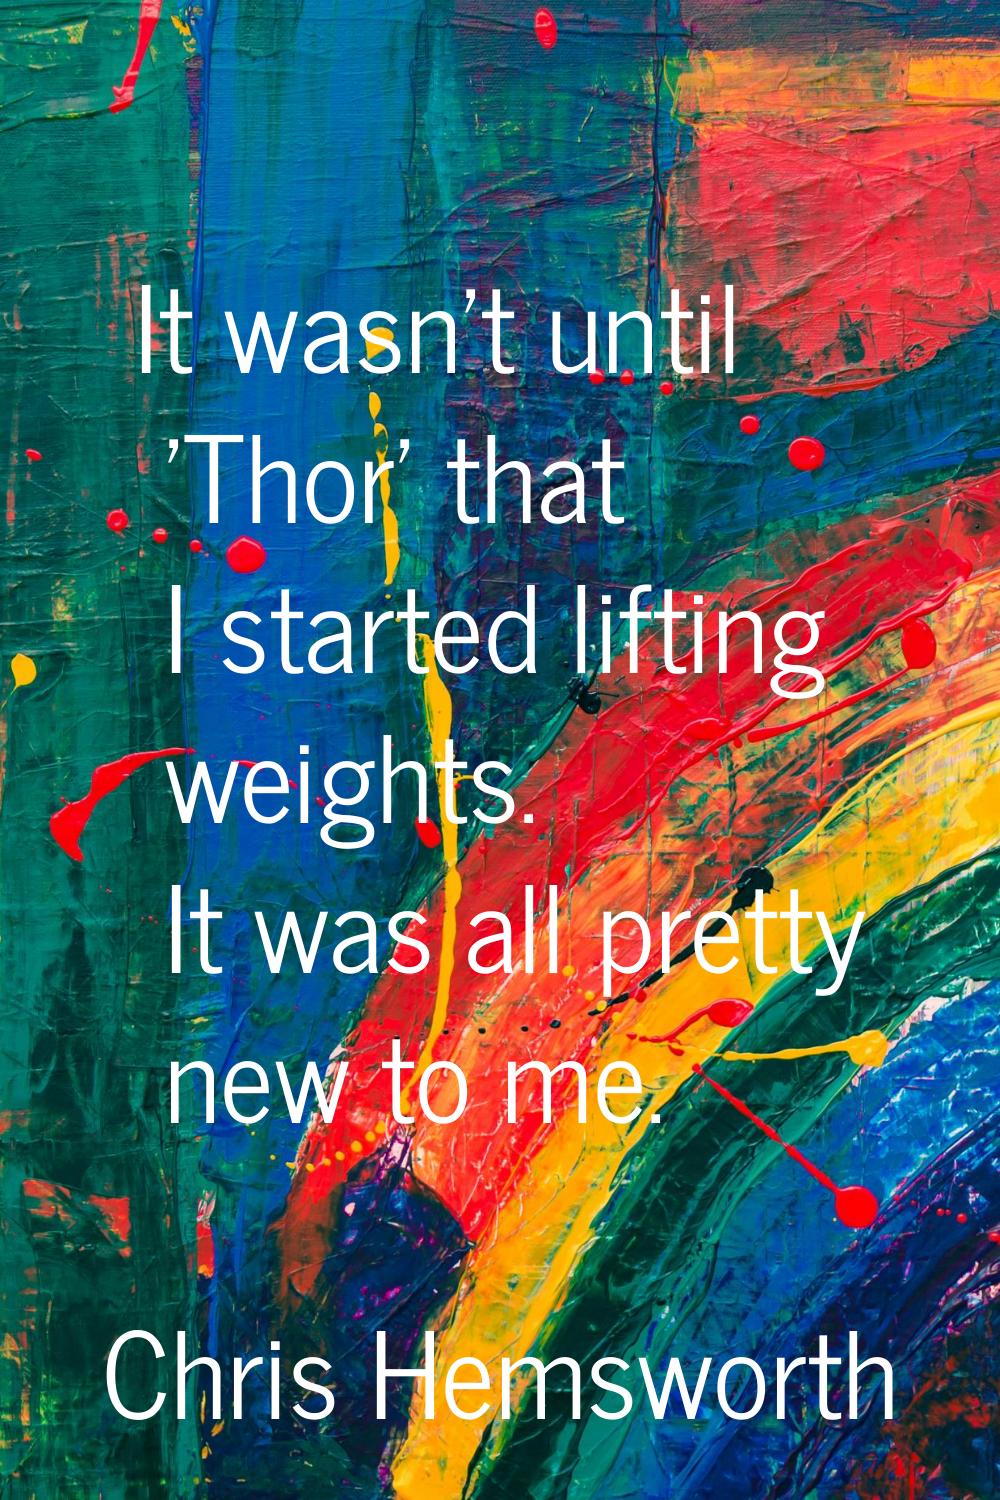 It wasn't until 'Thor' that I started lifting weights. It was all pretty new to me.